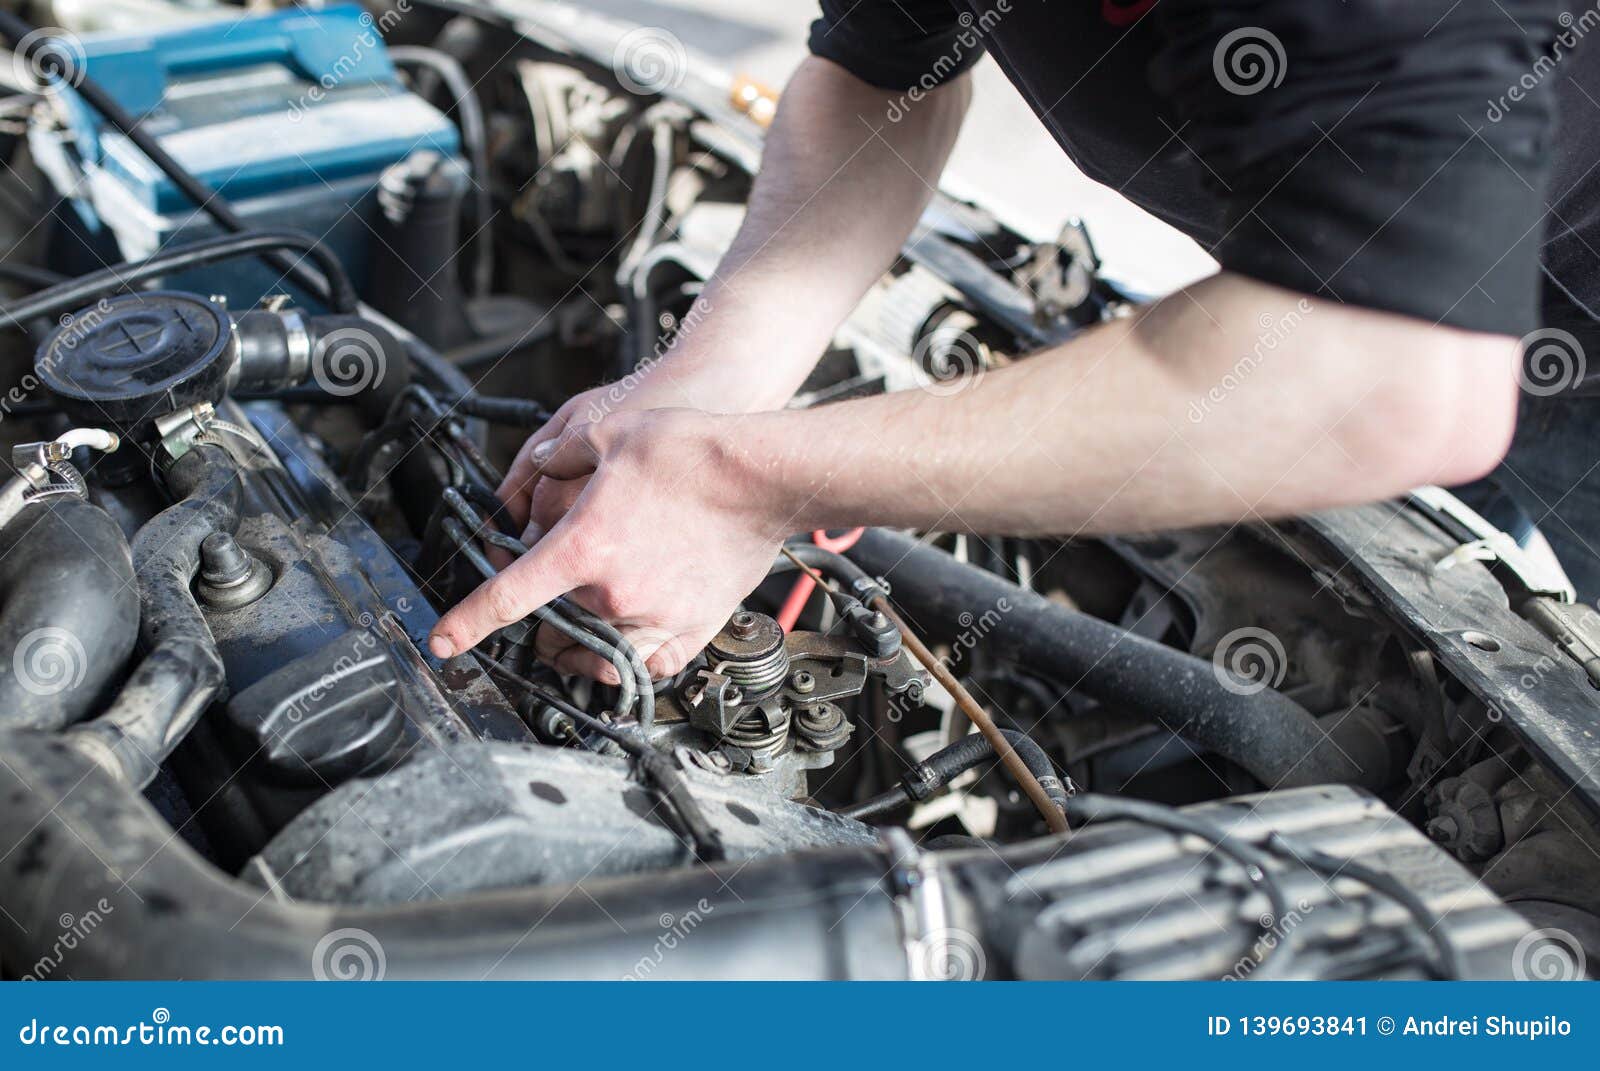 The Master Repairs Under the Hood of the Car Stock Image - Image of